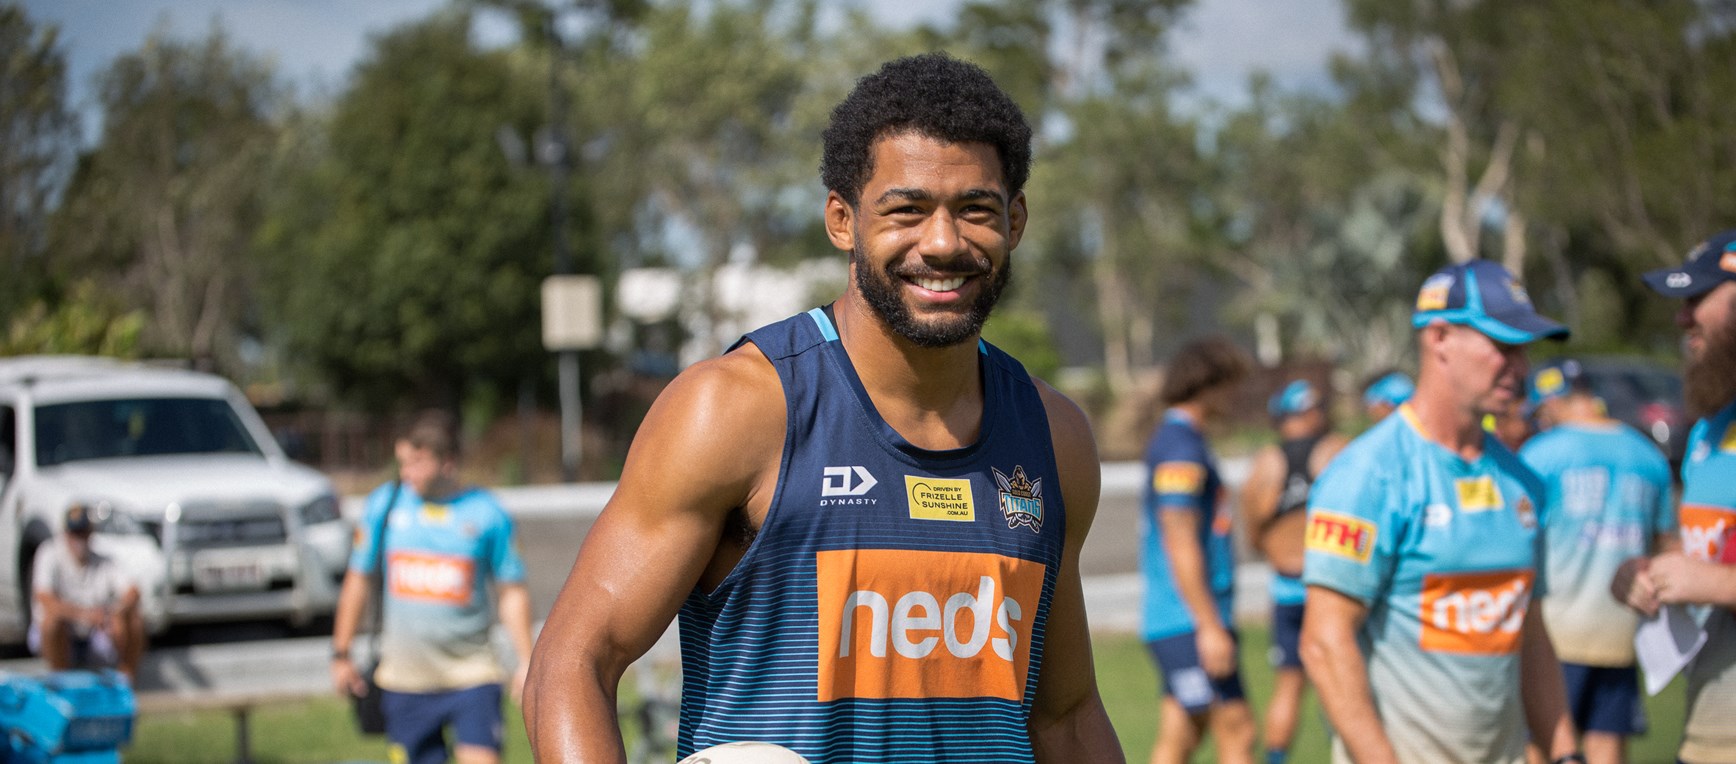 All Smiles At Training